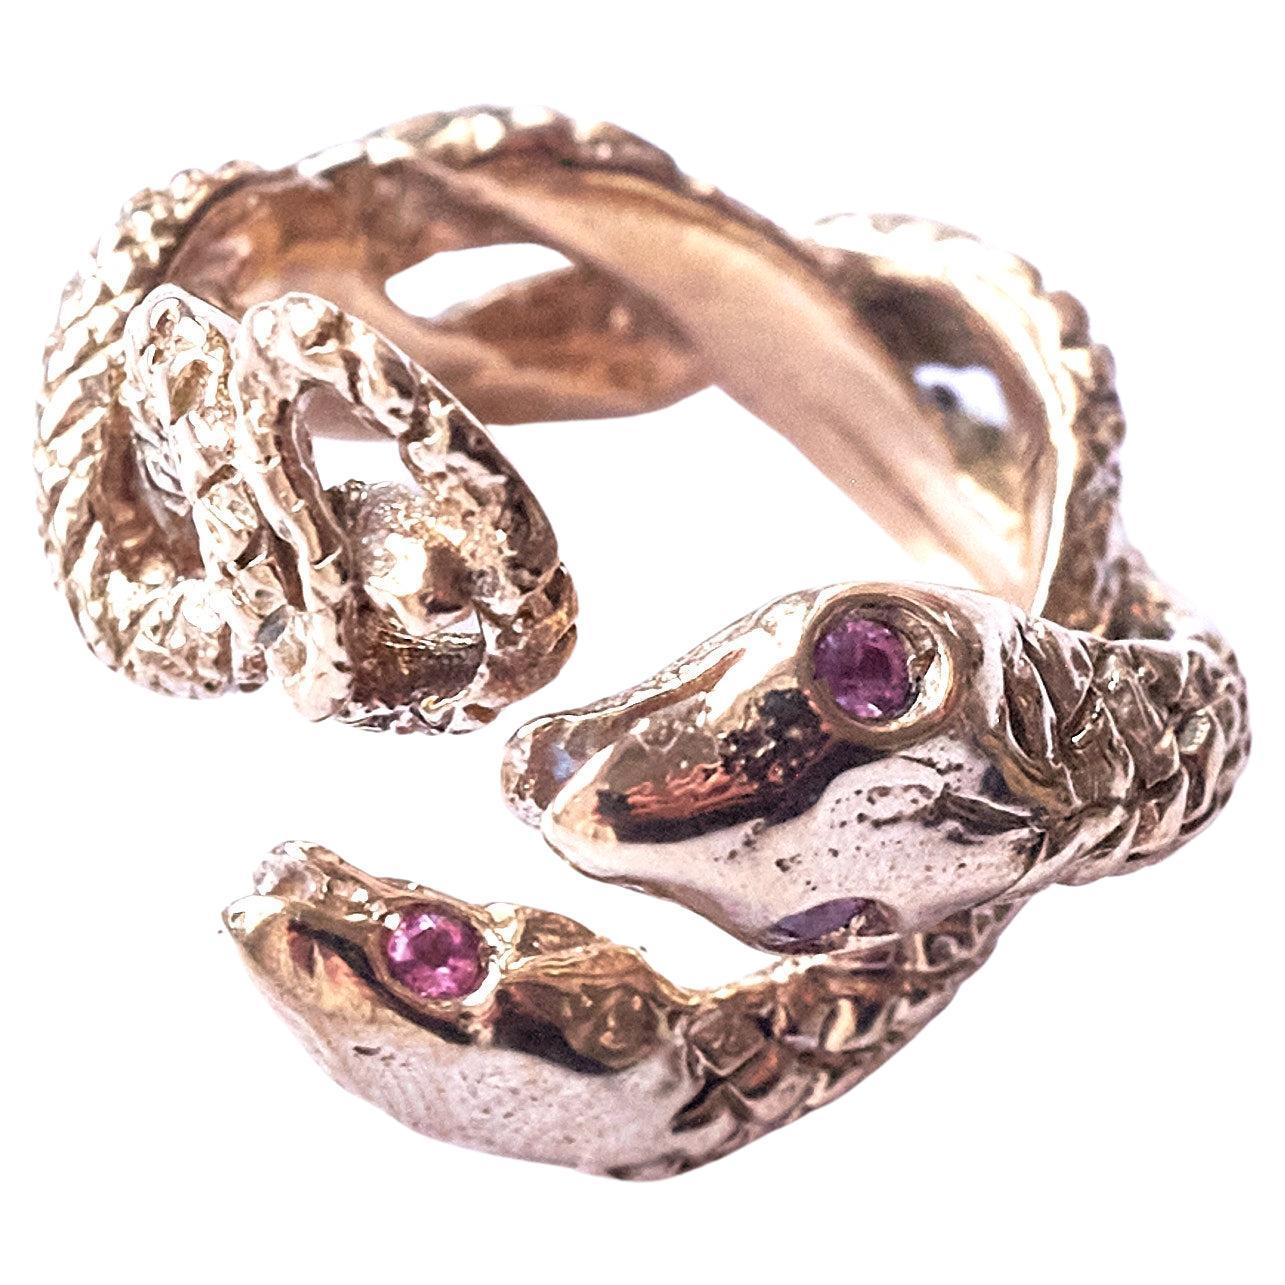 Animal jewelry Pink Sapphire Snake Ring Bronze Cocktail Ring J Dauphin For Sale